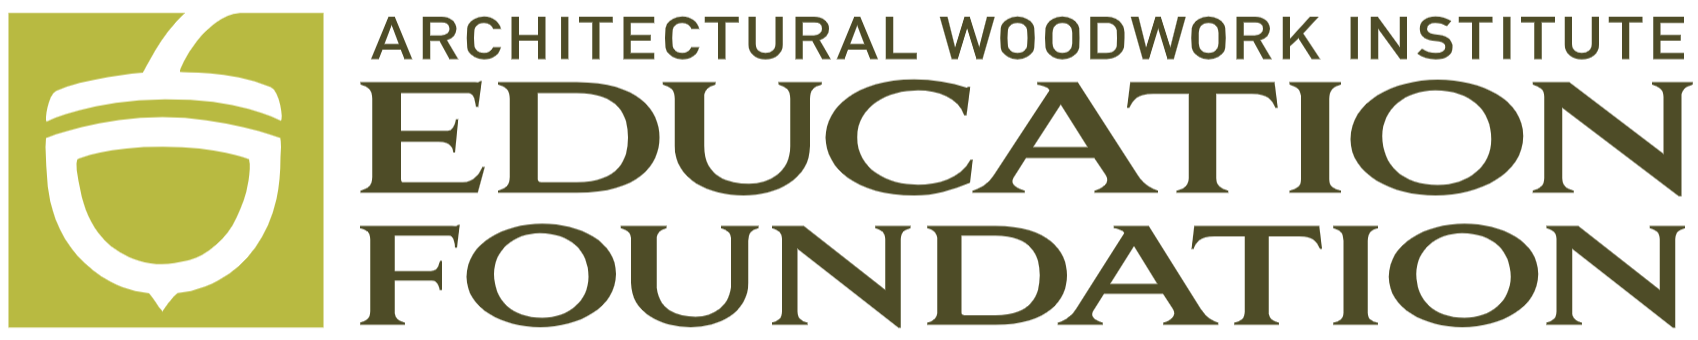 Architectural Woodwork Institute Education Foundation logo